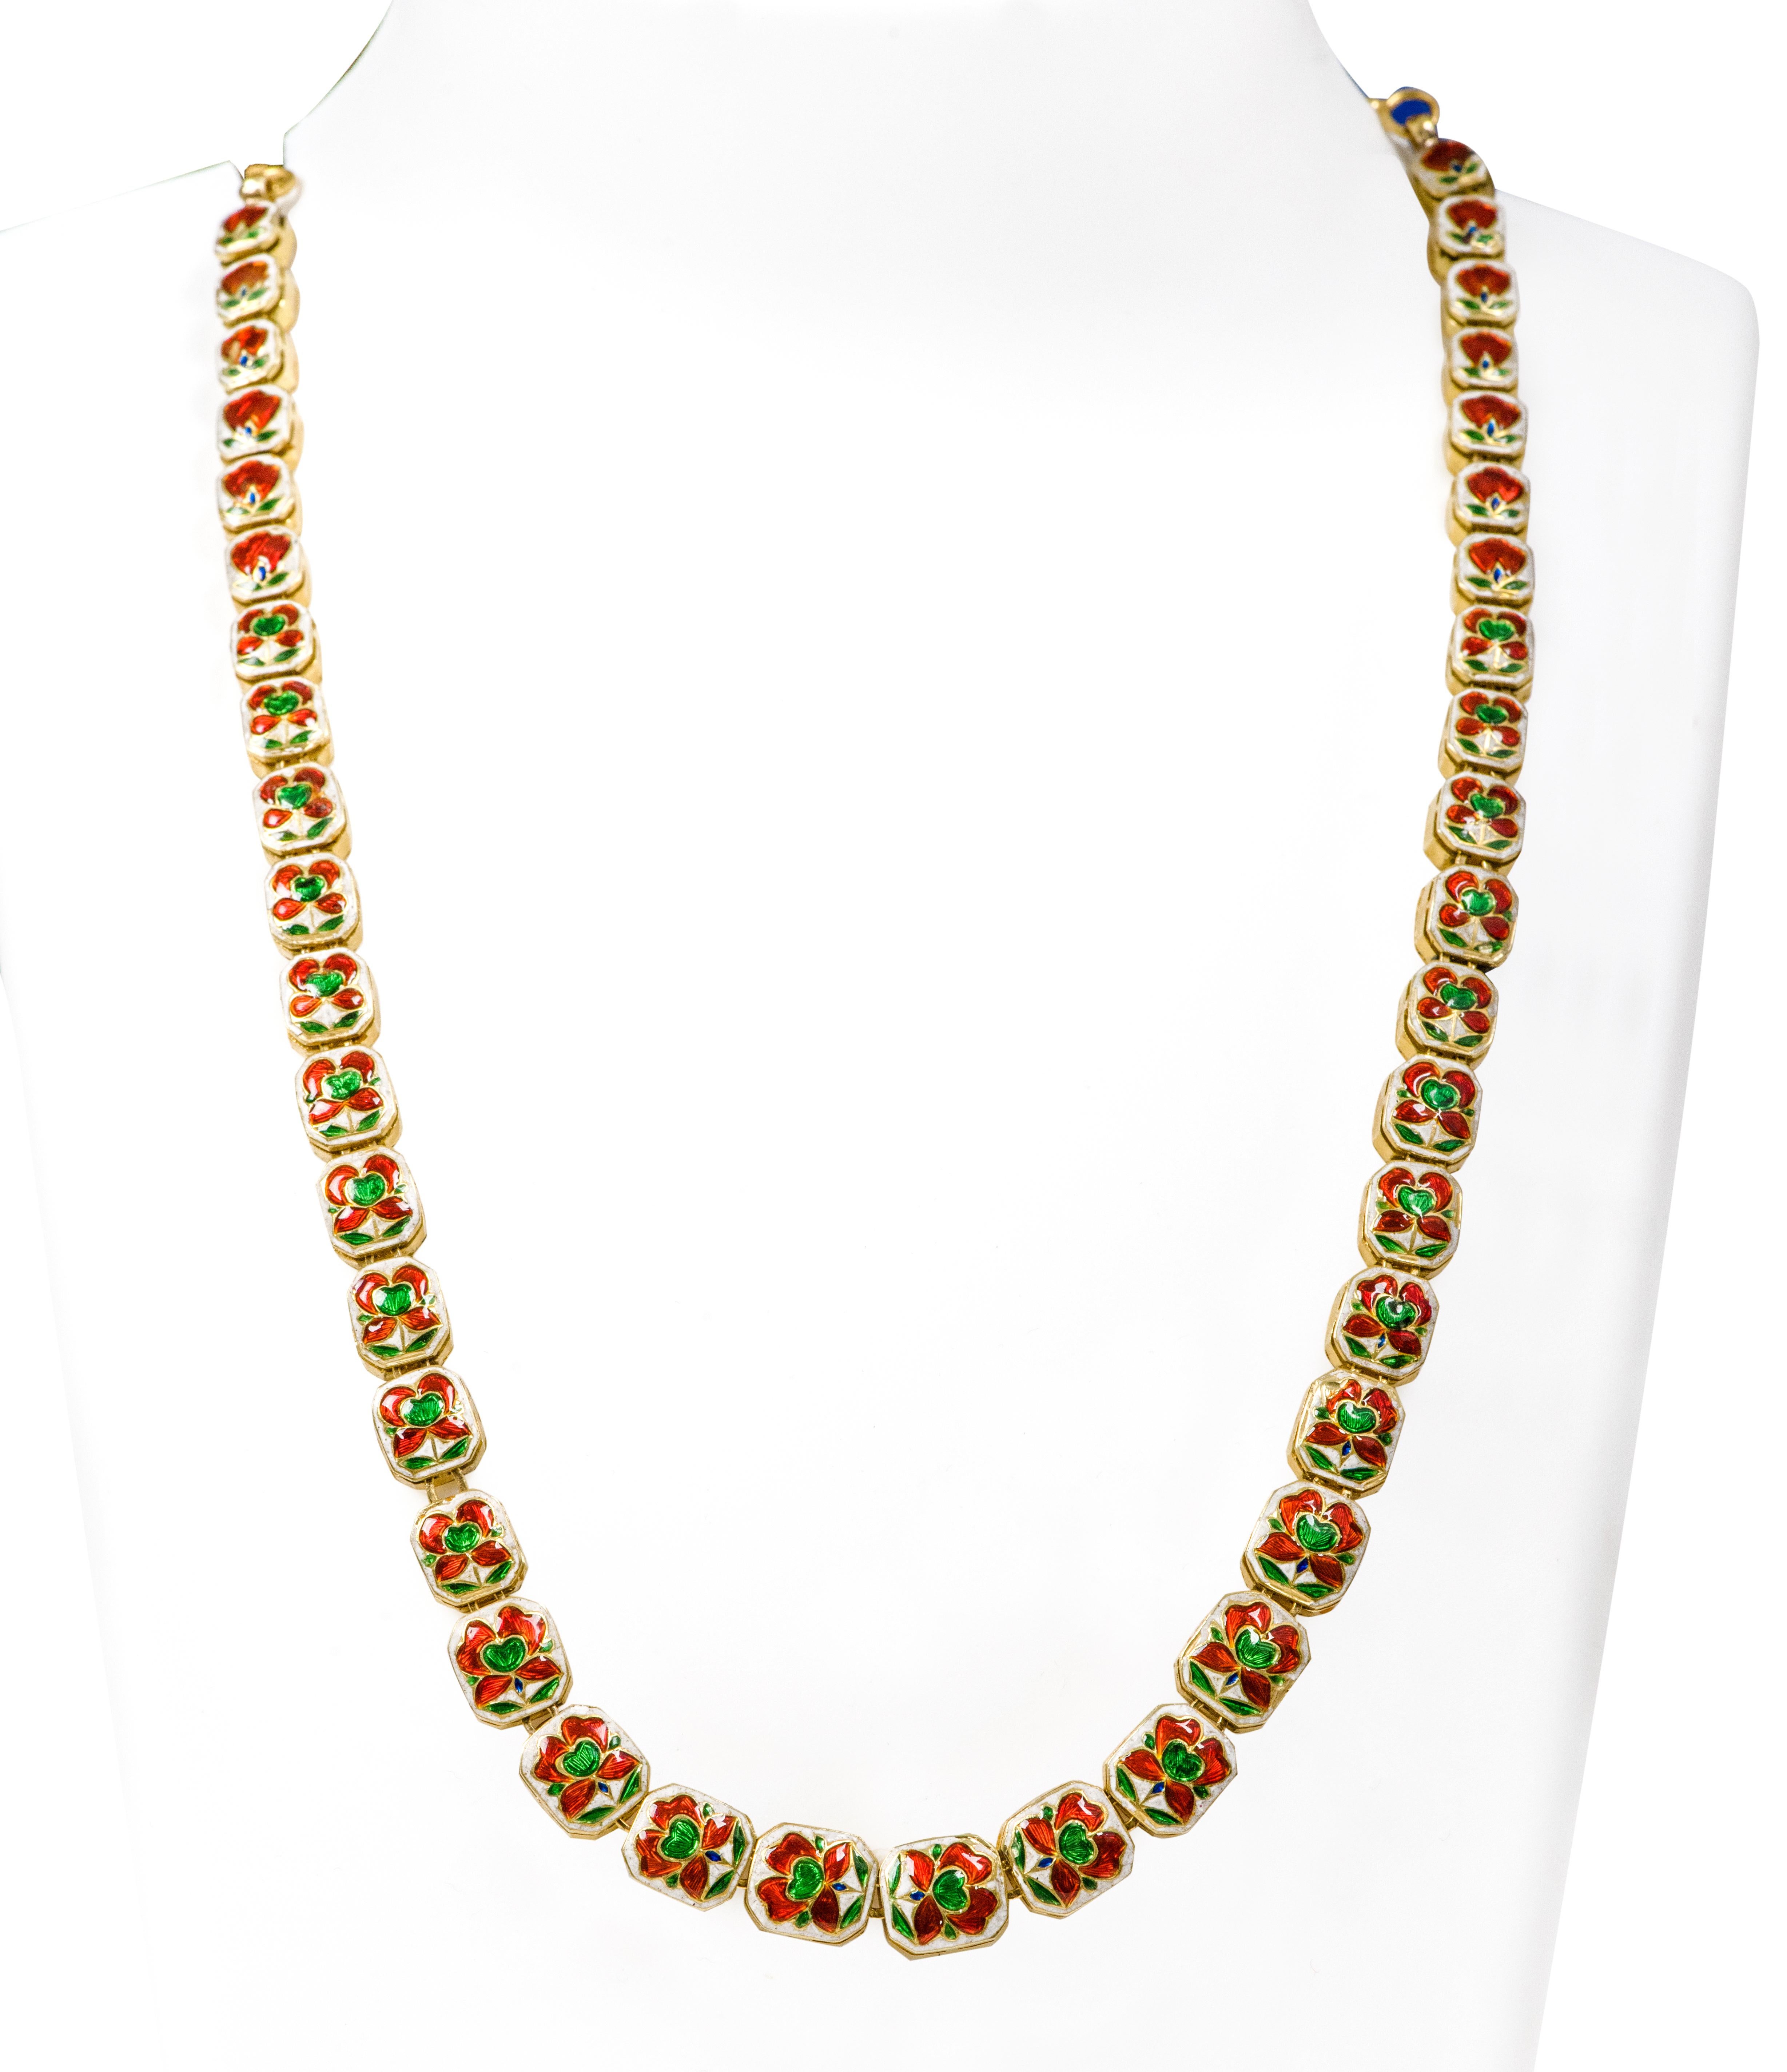 Uncut 18 Karat Gold 14.13 Carats Diamond Necklace Handcrafted with Multi-Color Enamel For Sale